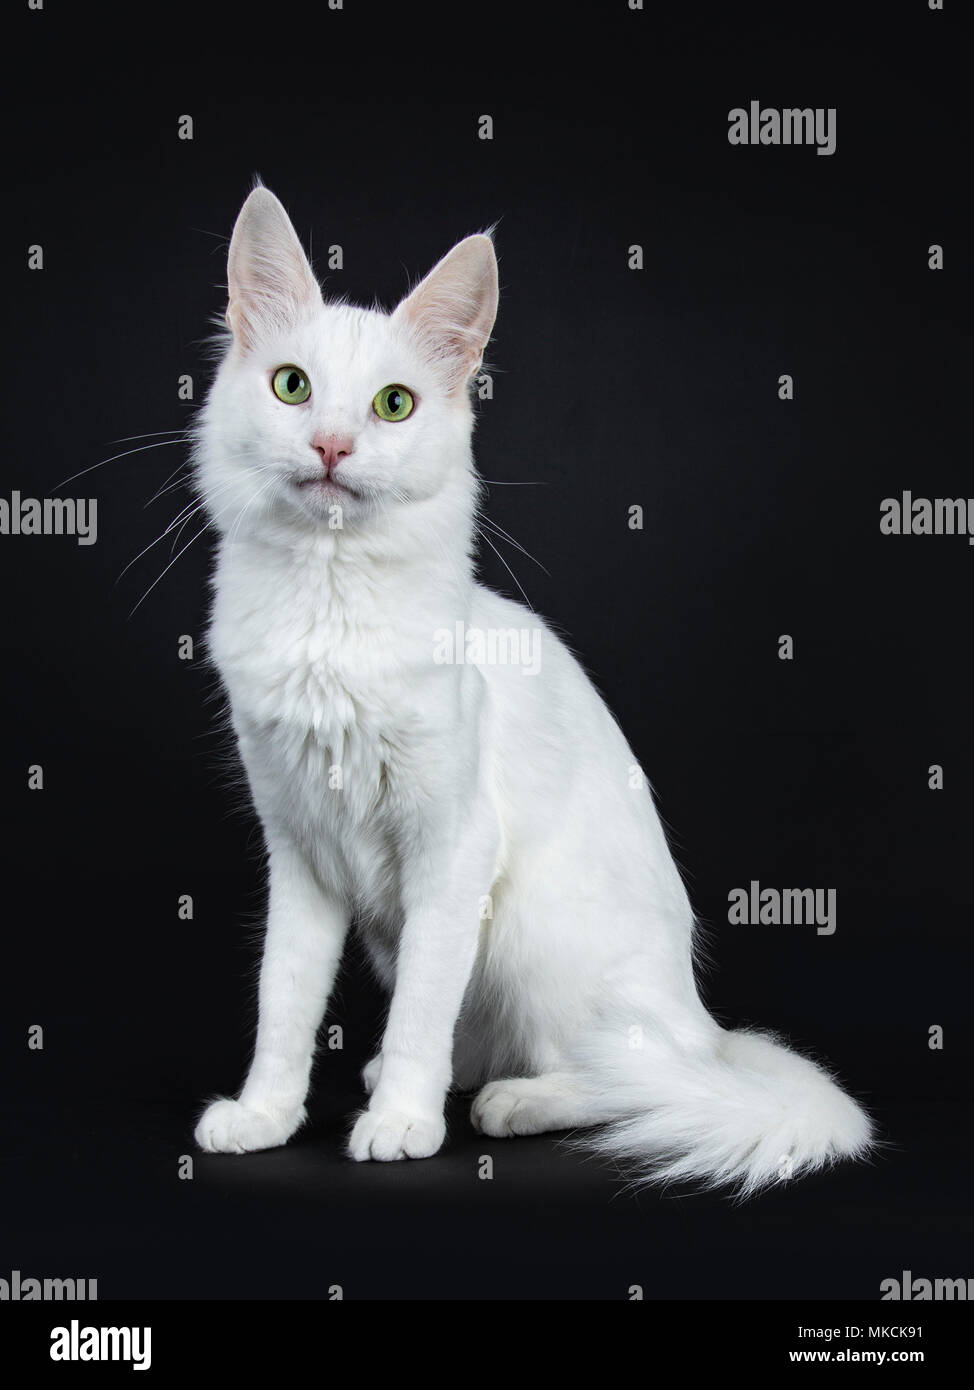 Solid white Turkish Angora cat with green eyes sitting side ways isolated on black background looking at camera Stock Photo